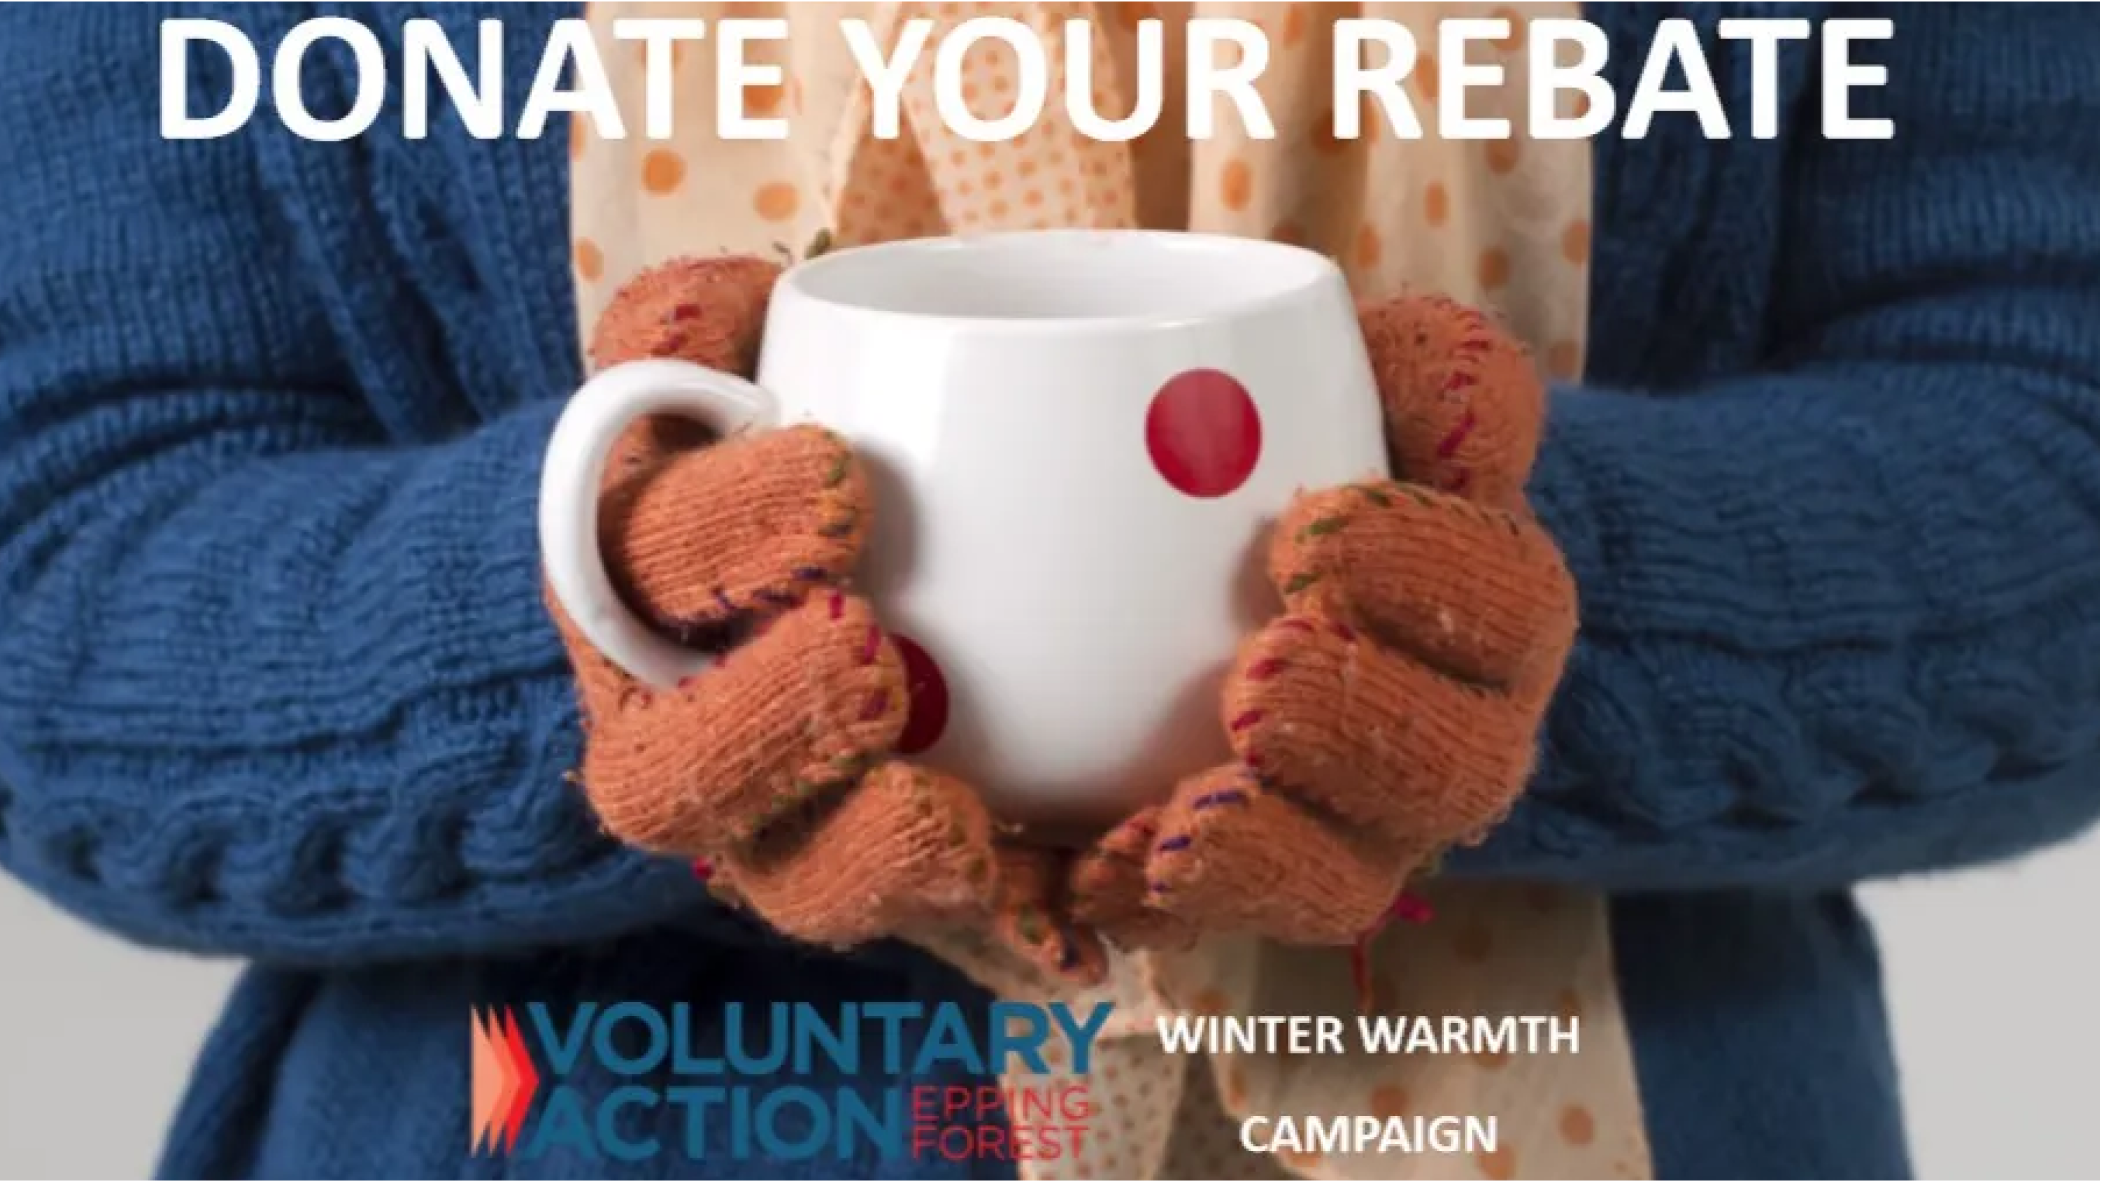 winter-energy-donation-scheme-donating-your-energy-rebate-to-those-in-need